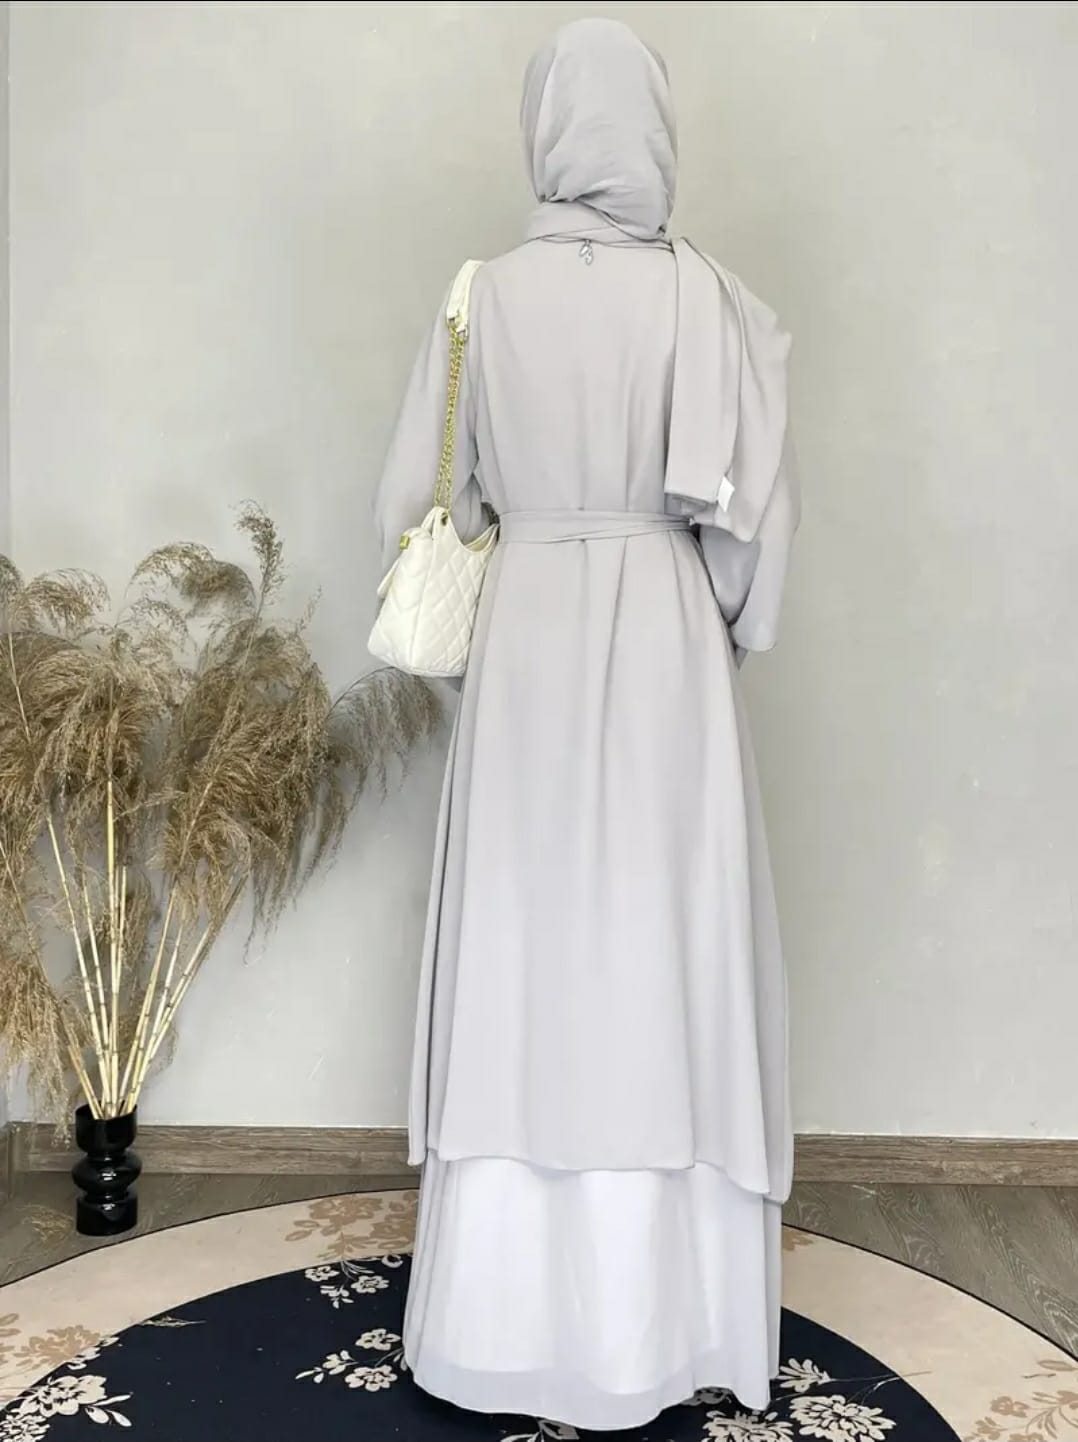 Open Front Abaya Cover Up, Elegant Solid Layered Hem Maxi Length Cover Up, Women's Clothing